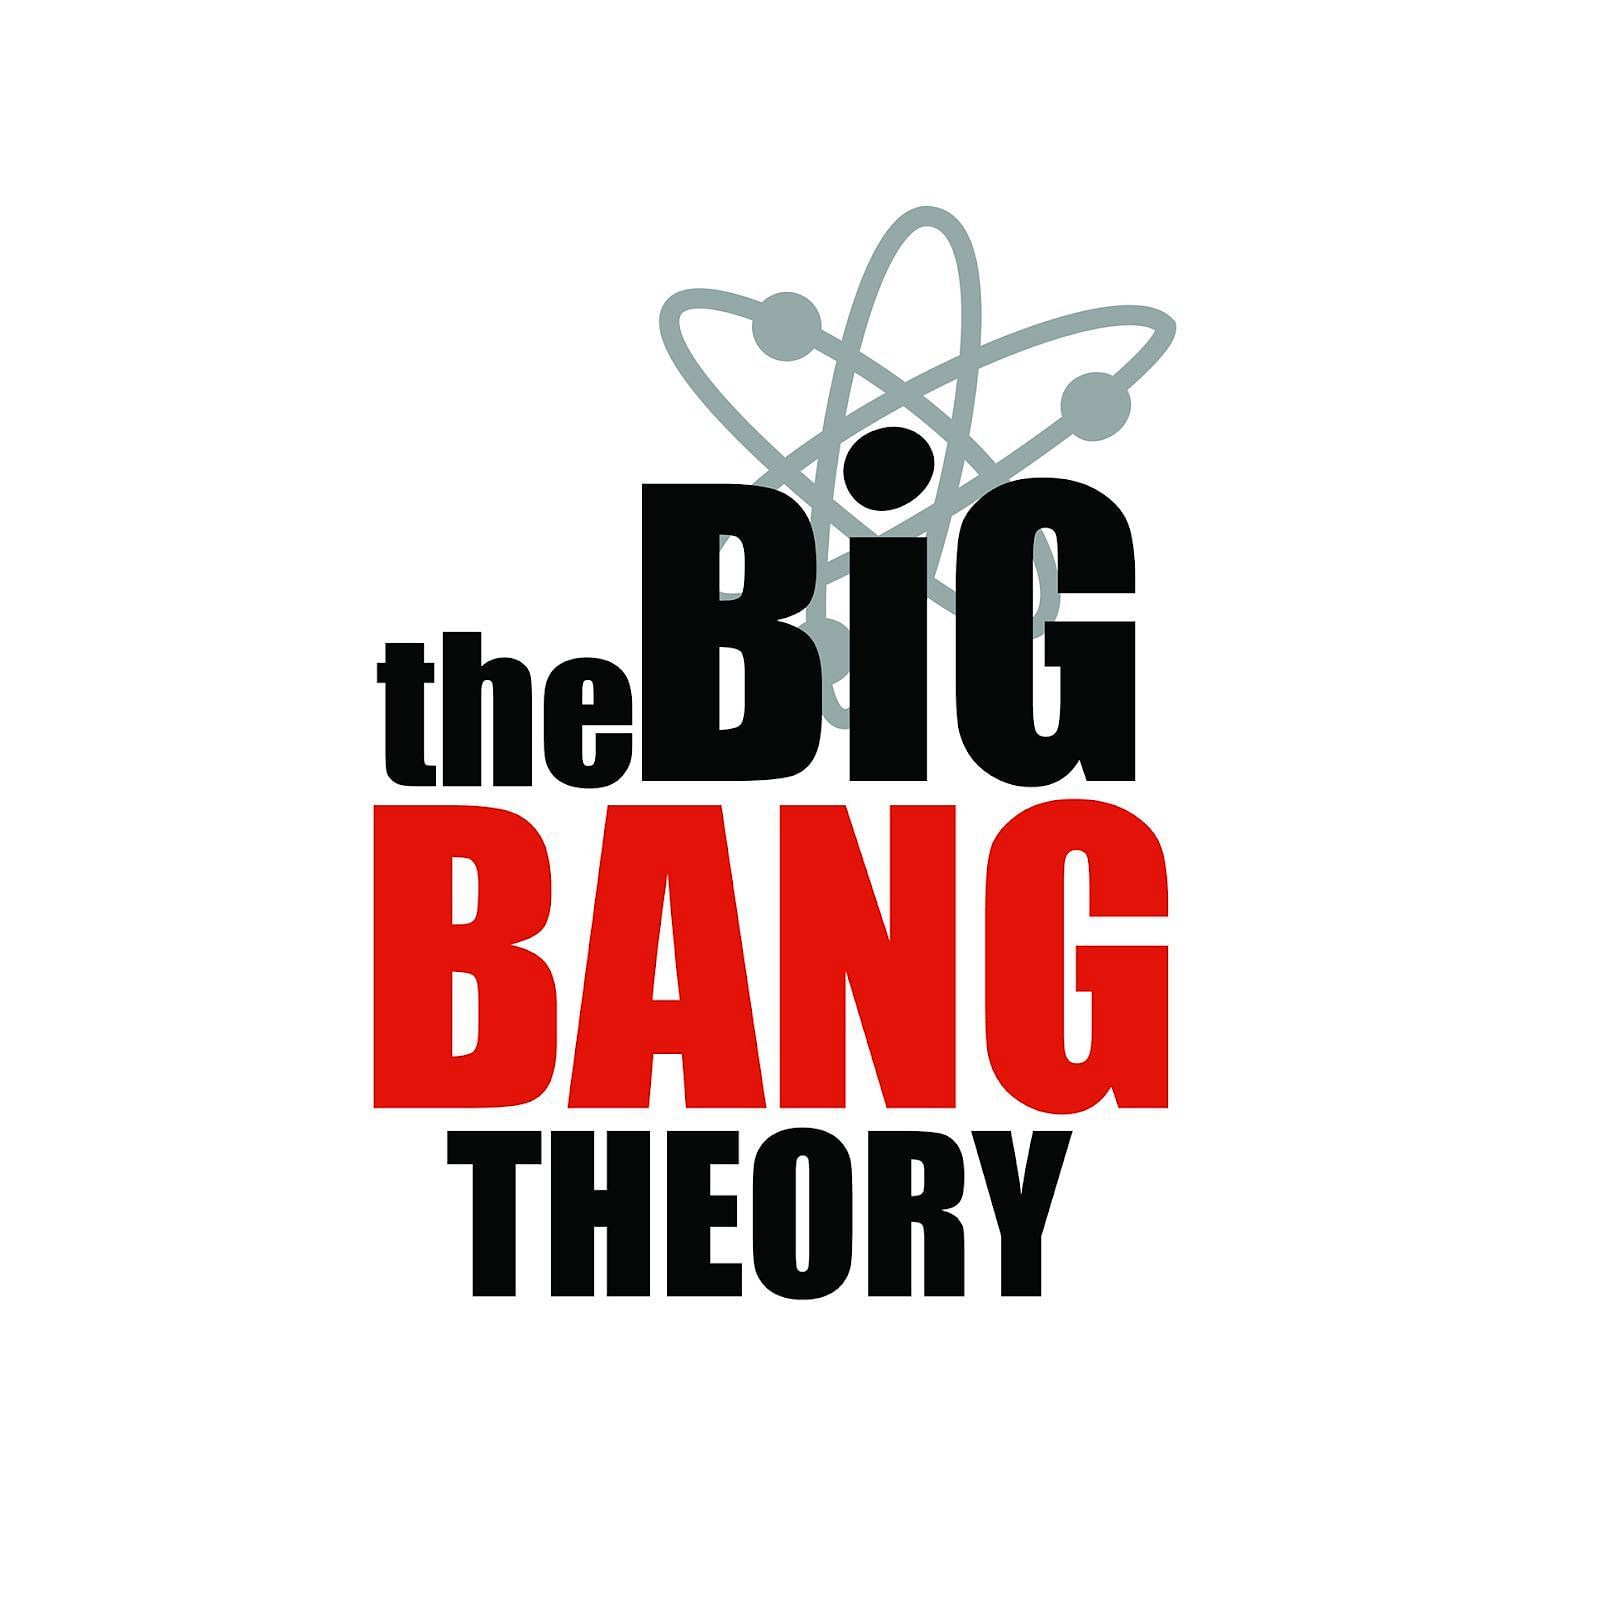 Who created the theme song of The Big Bang Theory?